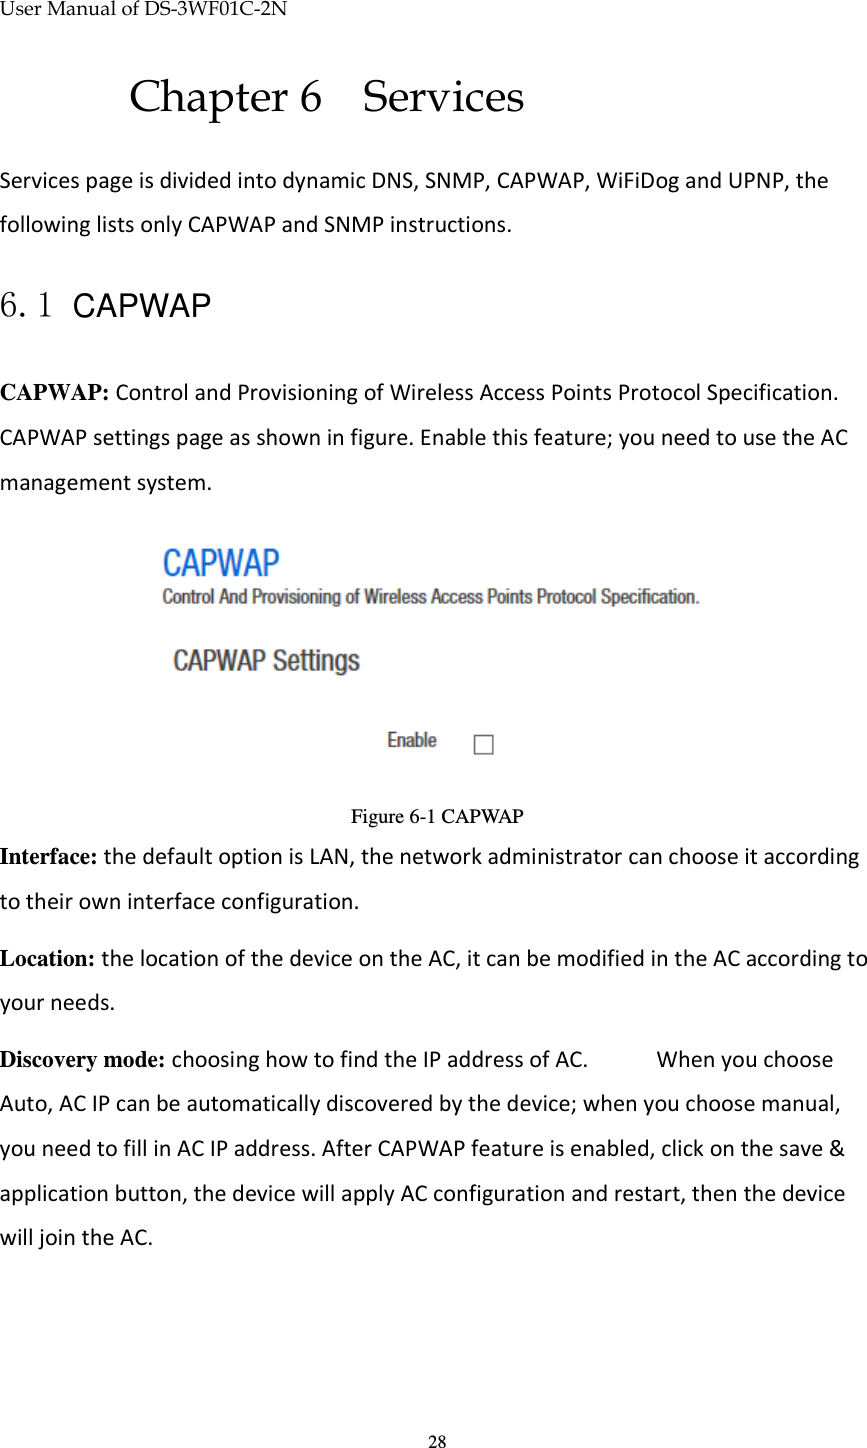 User Manual of DS-3WF01C-2N   28Chapter 6 Services Services page is divided into dynamic DNS, SNMP, CAPWAP, WiFiDog and UPNP, the following lists only CAPWAP and SNMP instructions. 6.1 CAPWAP CAPWAP: Control and Provisioning of Wireless Access Points Protocol Specification. CAPWAP settings page as shown in figure. Enable this feature; you need to use the AC management system.  Figure 6-1 CAPWAP Interface: the default option is LAN, the network administrator can choose it according to their own interface configuration. Location: the location of the device on the AC, it can be modified in the AC according to your needs. Discovery mode: choosing how to find the IP address of AC.   When you choose Auto, AC IP can be automatically discovered by the device; when you choose manual, you need to fill in AC IP address. After CAPWAP feature is enabled, click on the save &amp; application button, the device will apply AC configuration and restart, then the device will join the AC. 